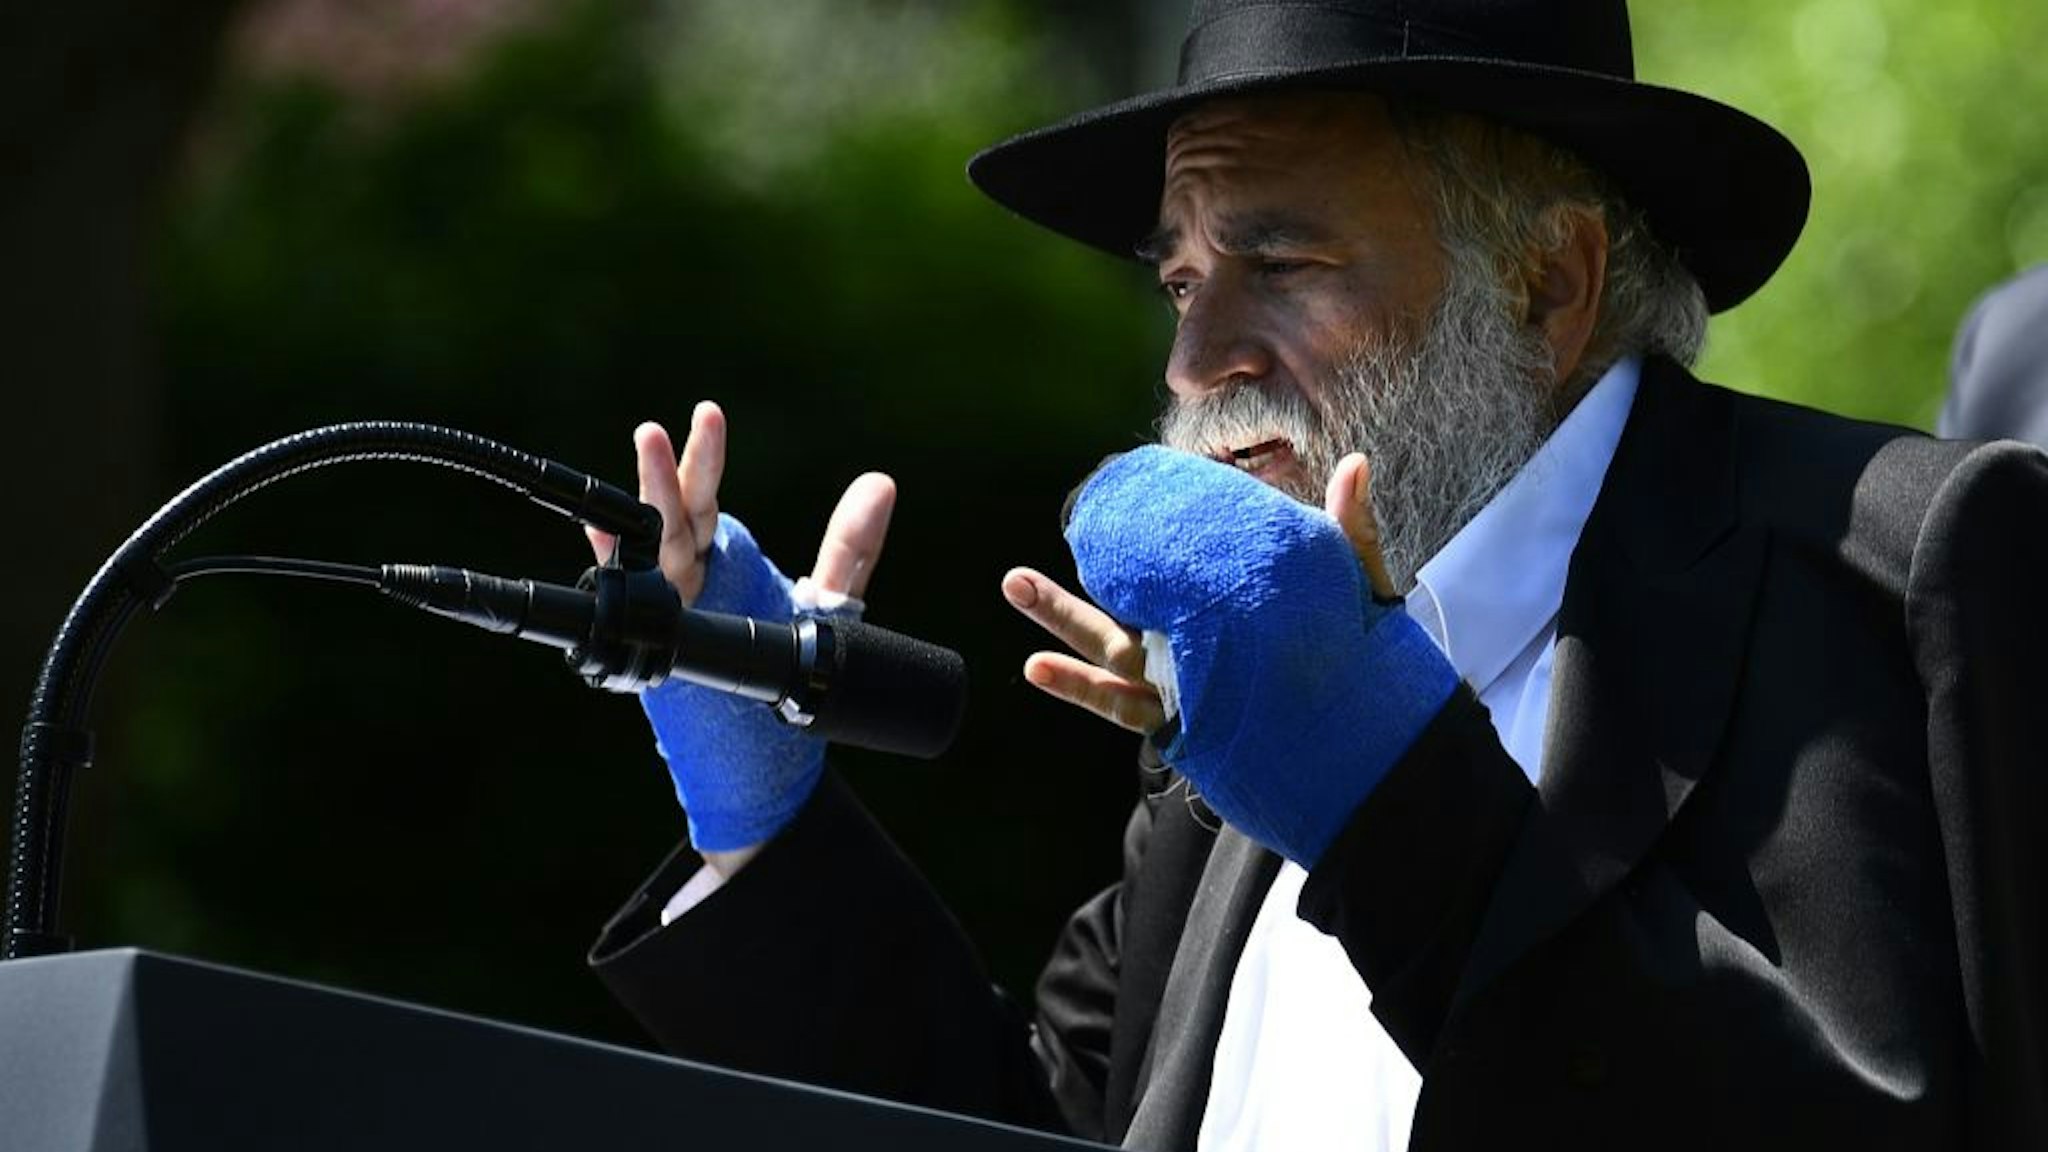 Rabbi Yisroel Goldstein speaks during the National Day of Prayer Service, in the Rose Garden of the White House in Washington, DC, on May 2, 2019.